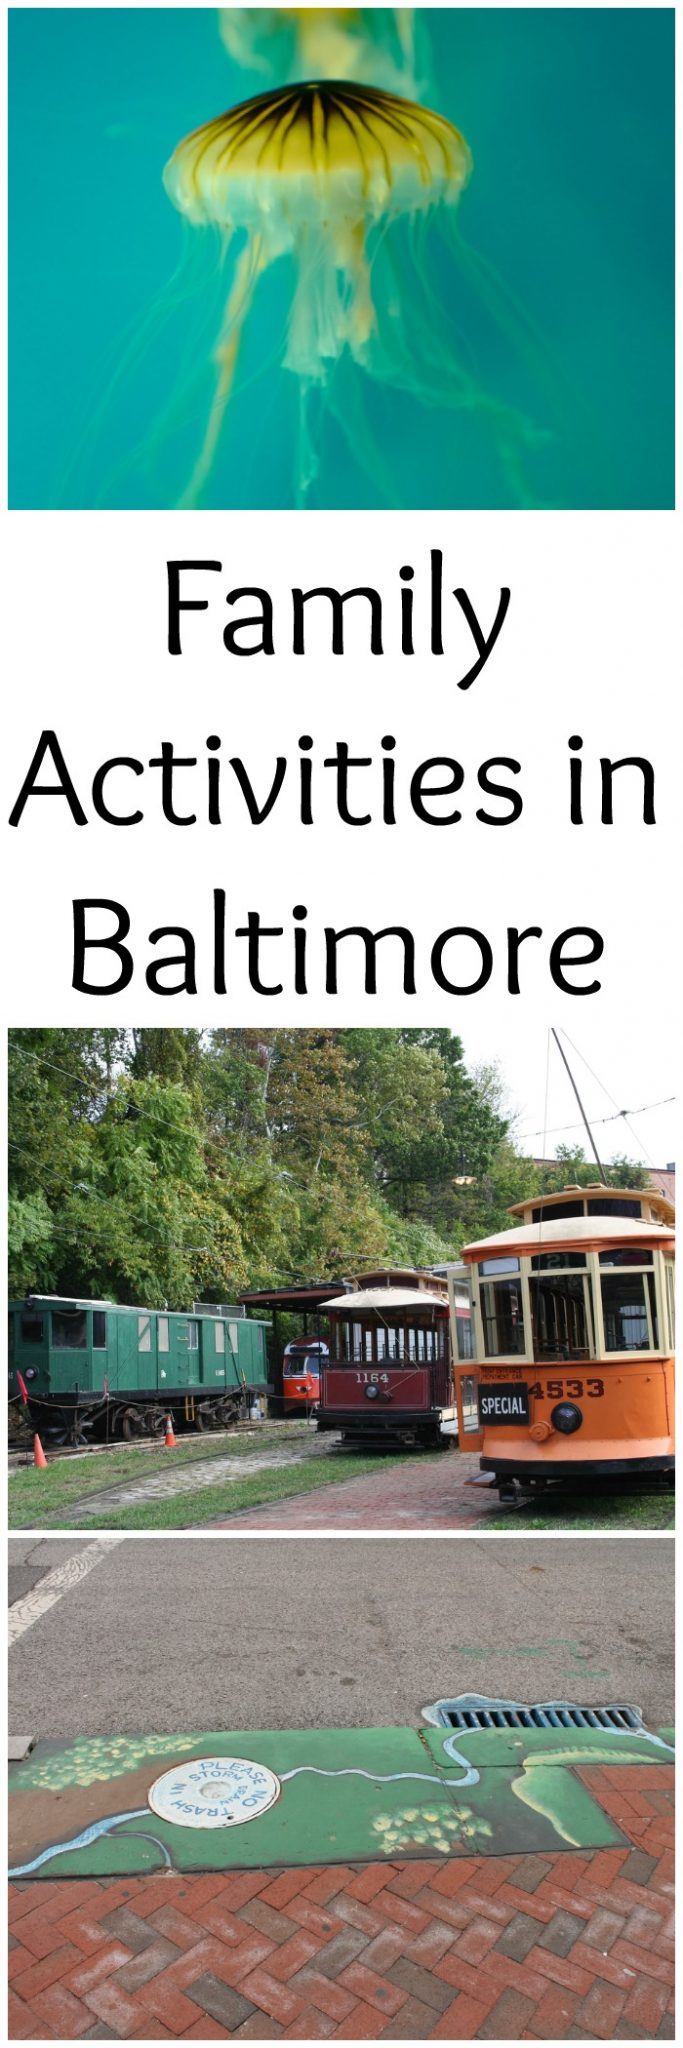 Looking for some family activities in Baltimore? Baltimore has so many fun things to do that. Here is a list of 16 things that the family will love.